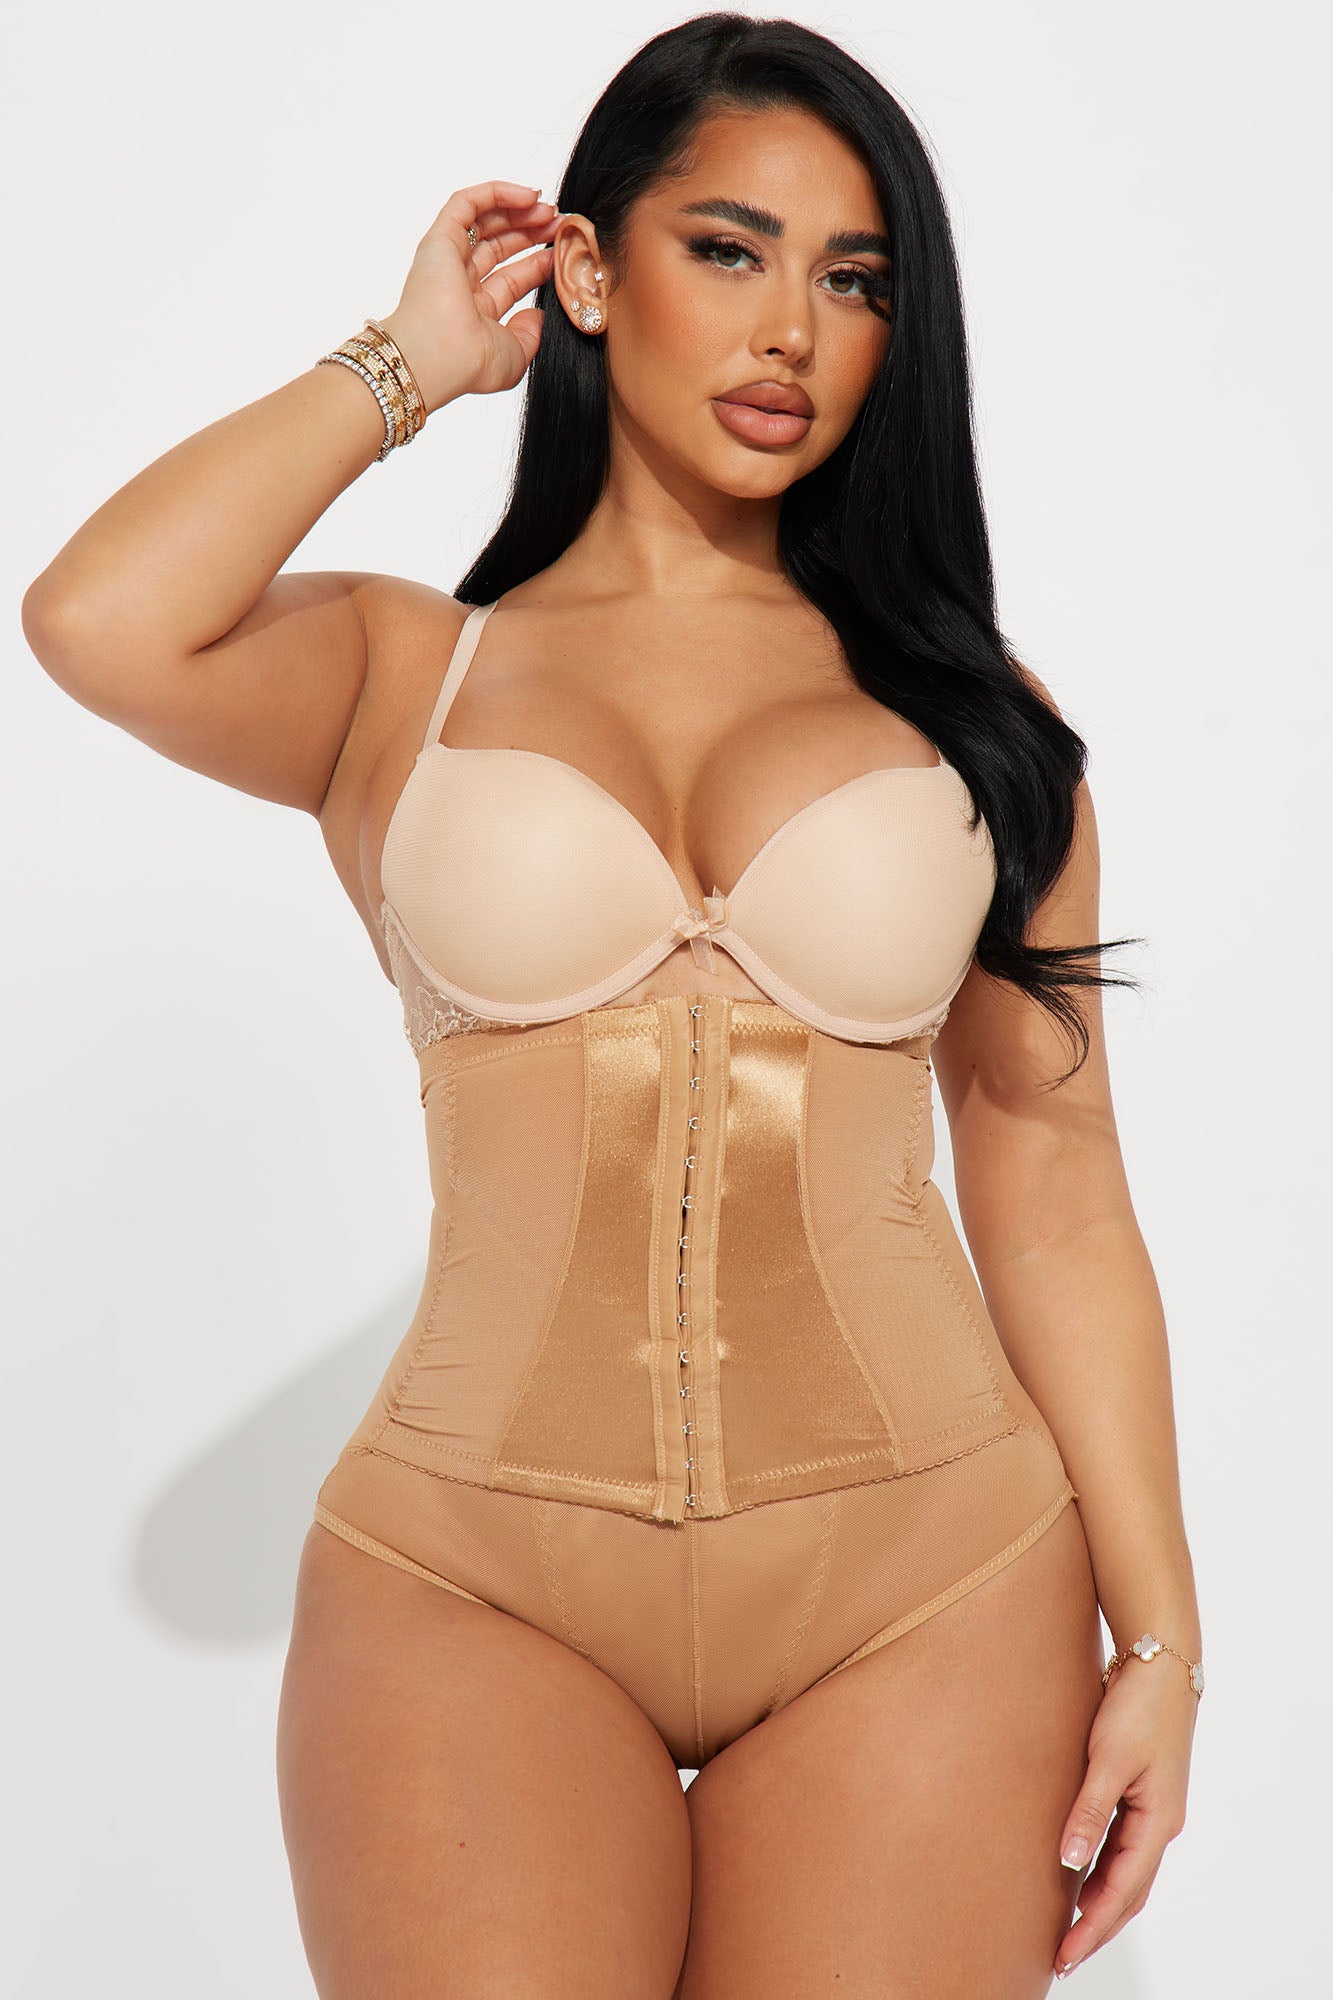 Women's Middle Manager Step-in Waist Cincher 4286, Nude, XL